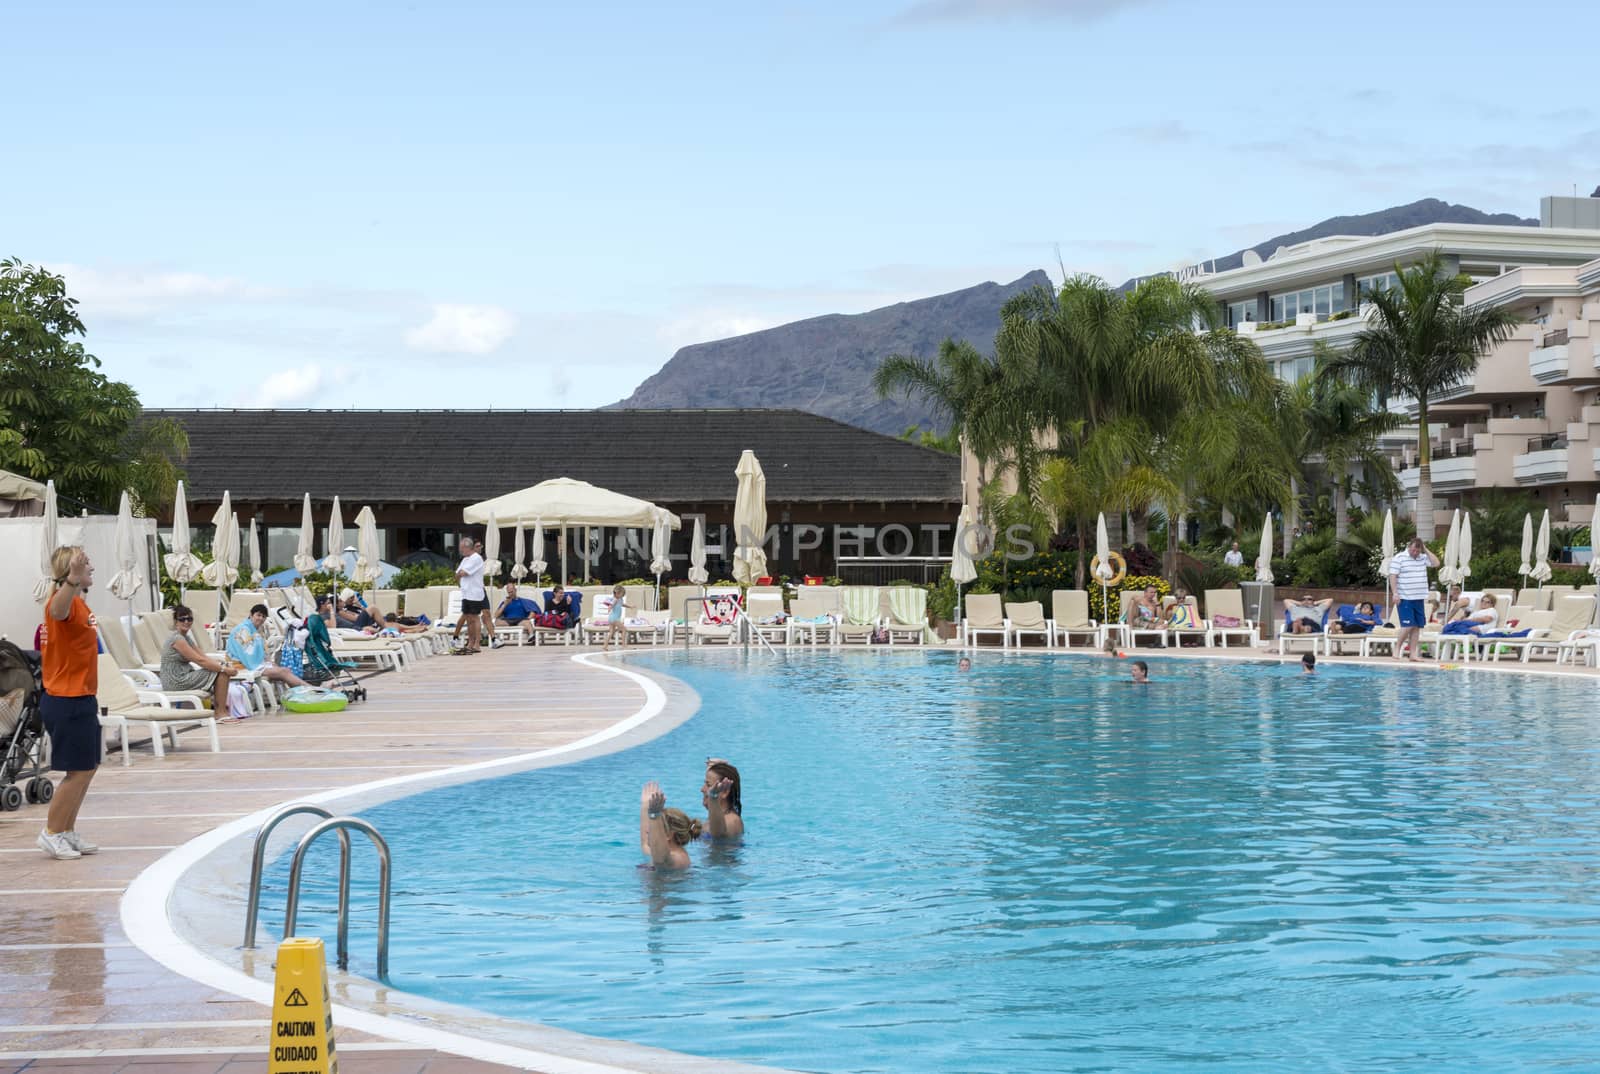 LOS CHRISTIANOS,TENERIFE-NOVEMBER 28, 2012: People enjoy vacation near the swimming pool at resort in Tenerife, on November 28,Tenerife tis one of the popular island of canadian islands.